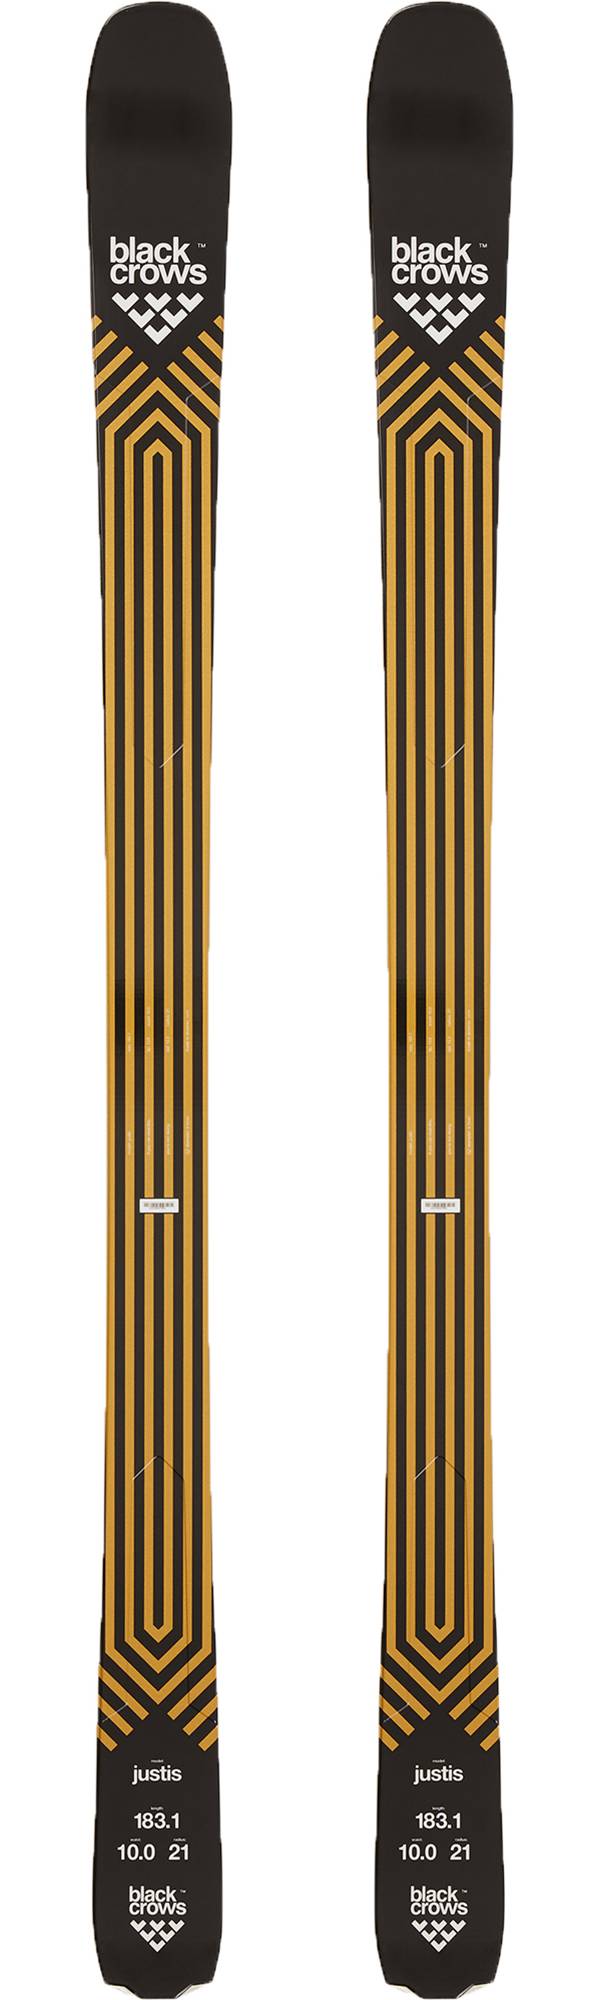 blackcrows '21-'22 Justis All-Mountain Skis product image